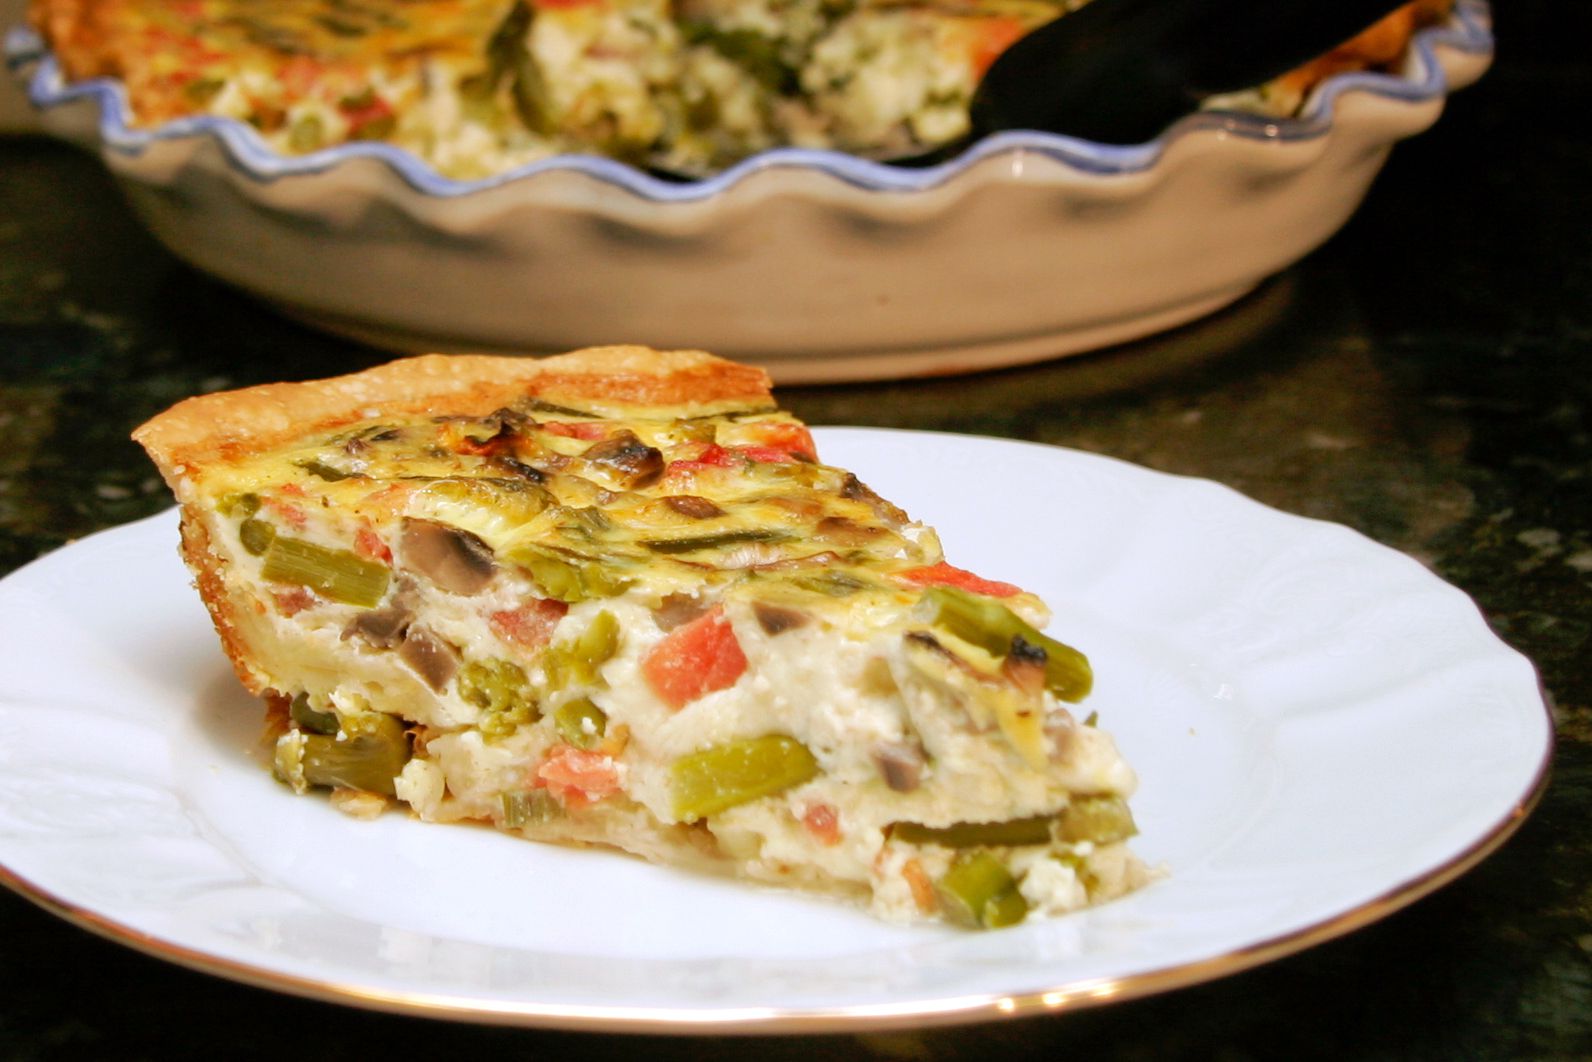 Asparagus Quiche Recipe With Mushrooms and Tomatoes